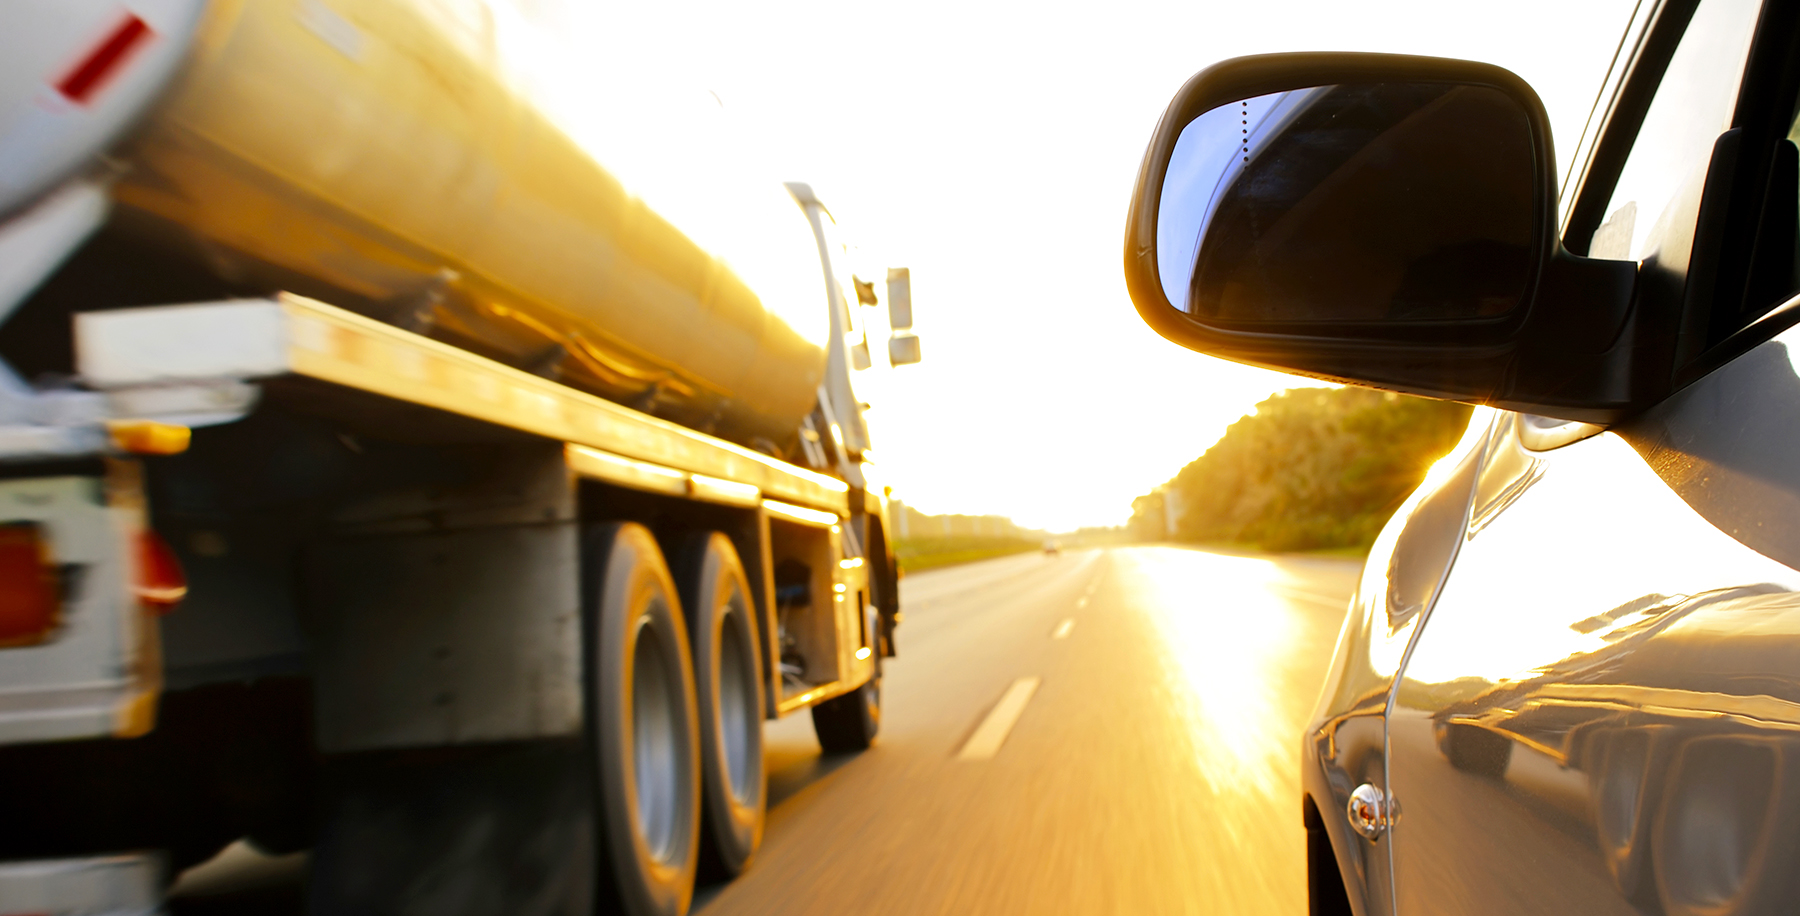 Truck Accidents and Their Major Causes